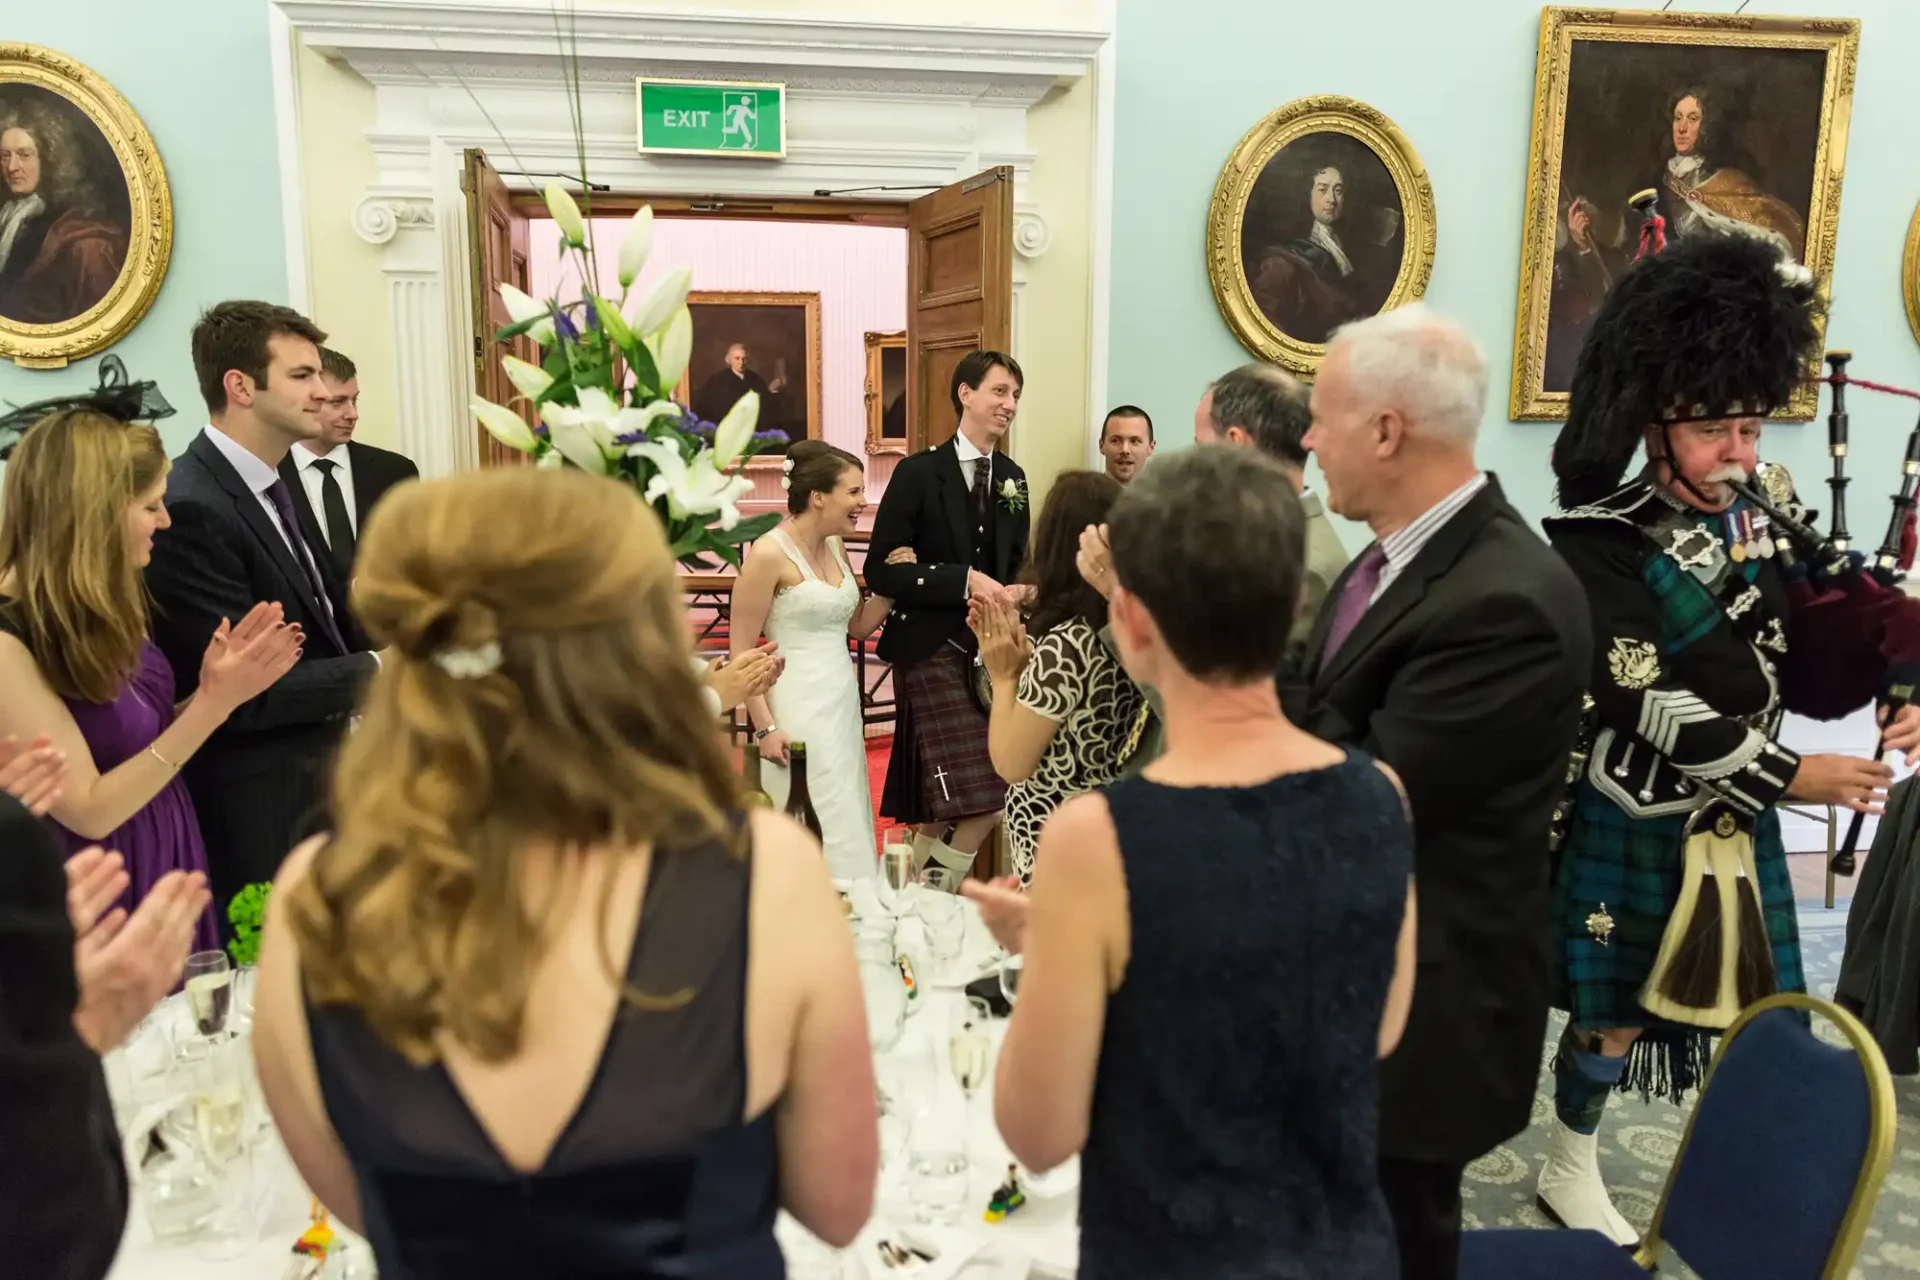 Guests clapping for a bride and groom at a wedding reception, with a bagpiper in traditional scottish attire playing in the foreground.